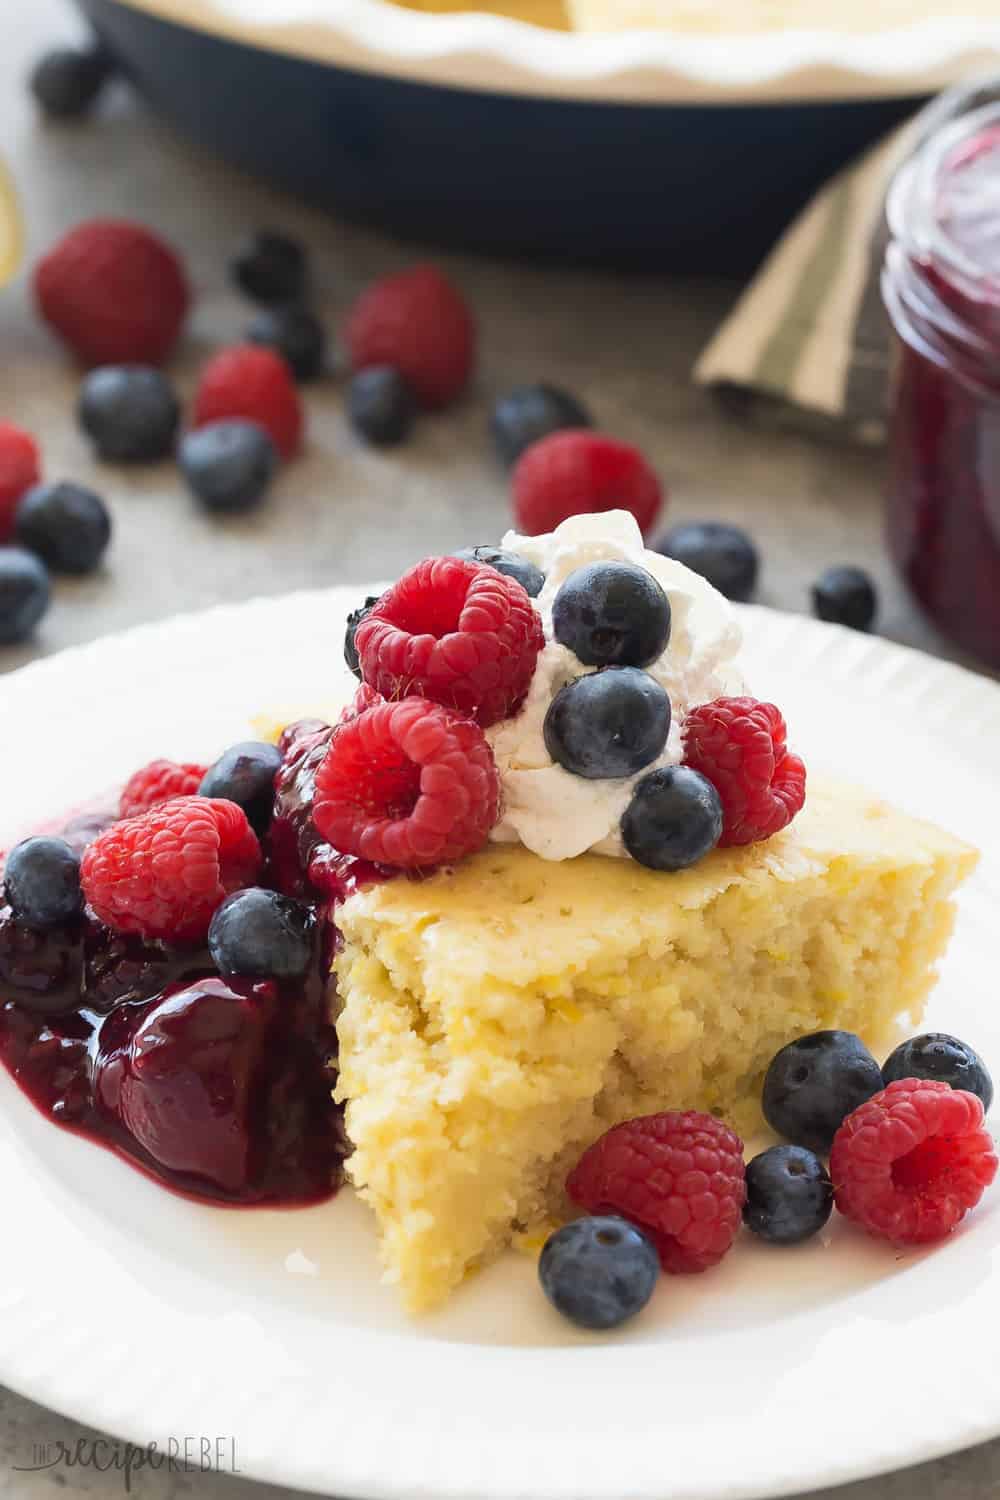 This Lemon Baked Pancake with Berry Sauce is such an easy breakfast for serving a crowd! Perfect for all your holiday brunches.